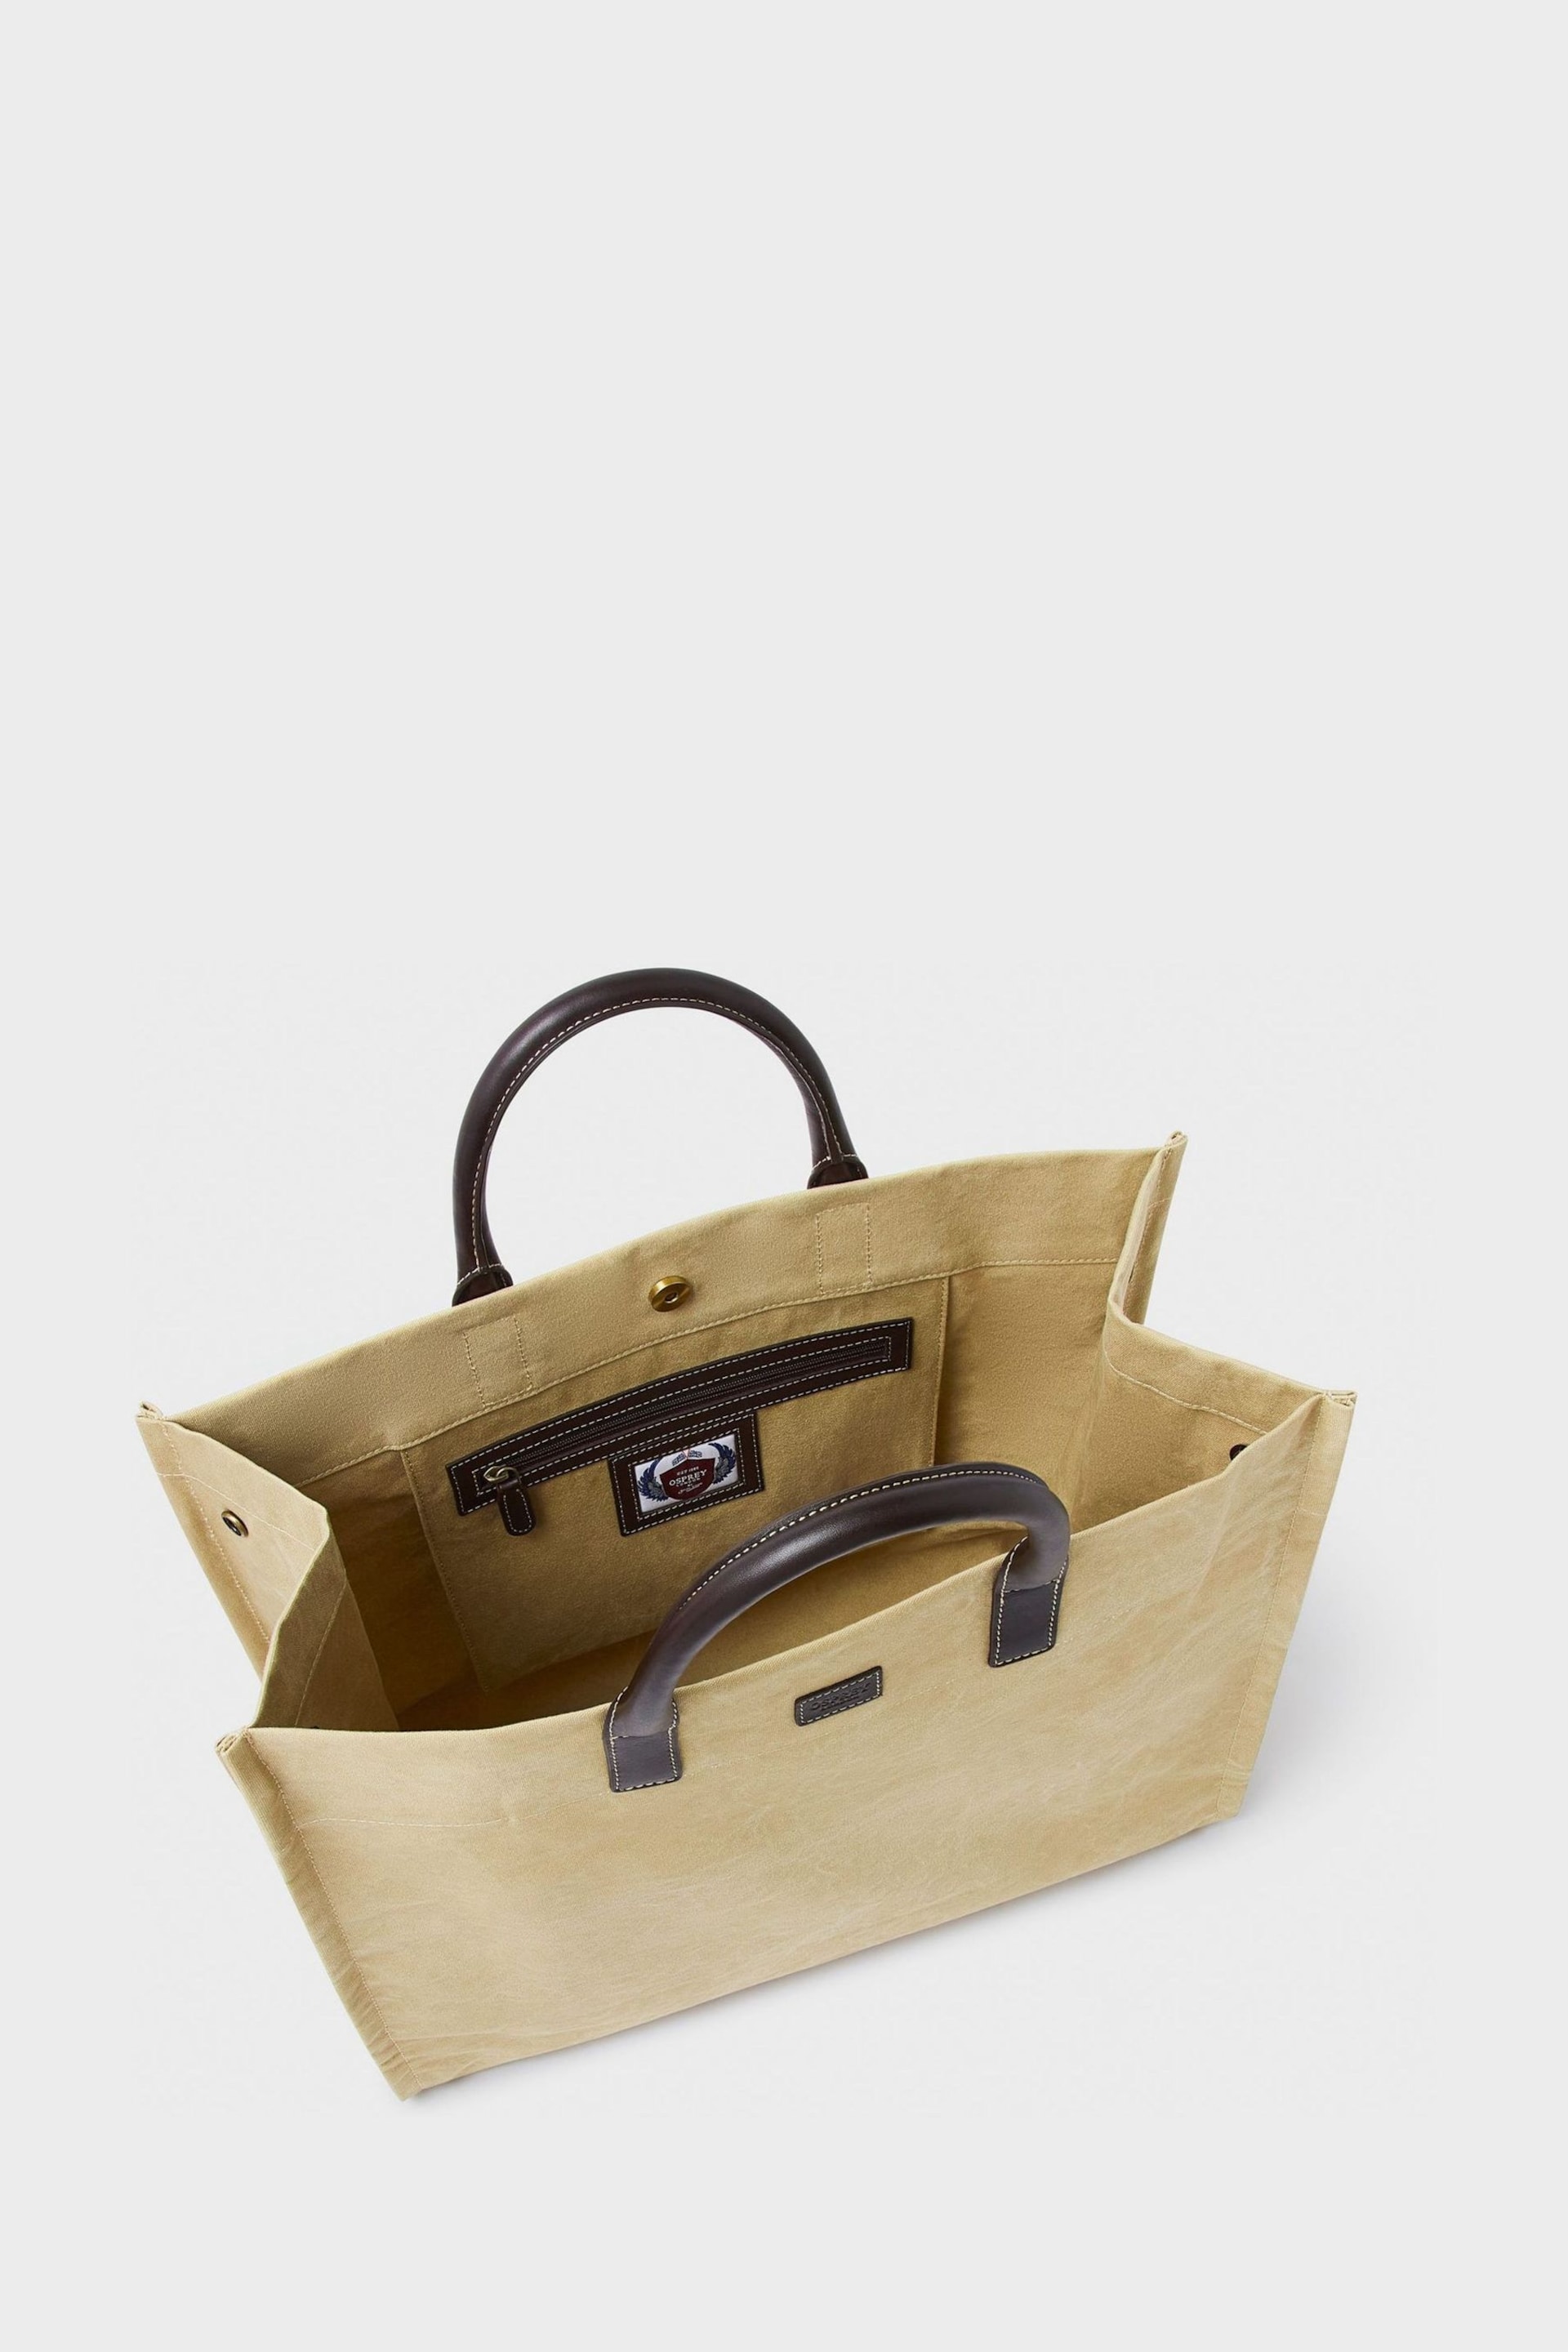 Osprey London The Mac Large Canvas Tote - Image 5 of 5